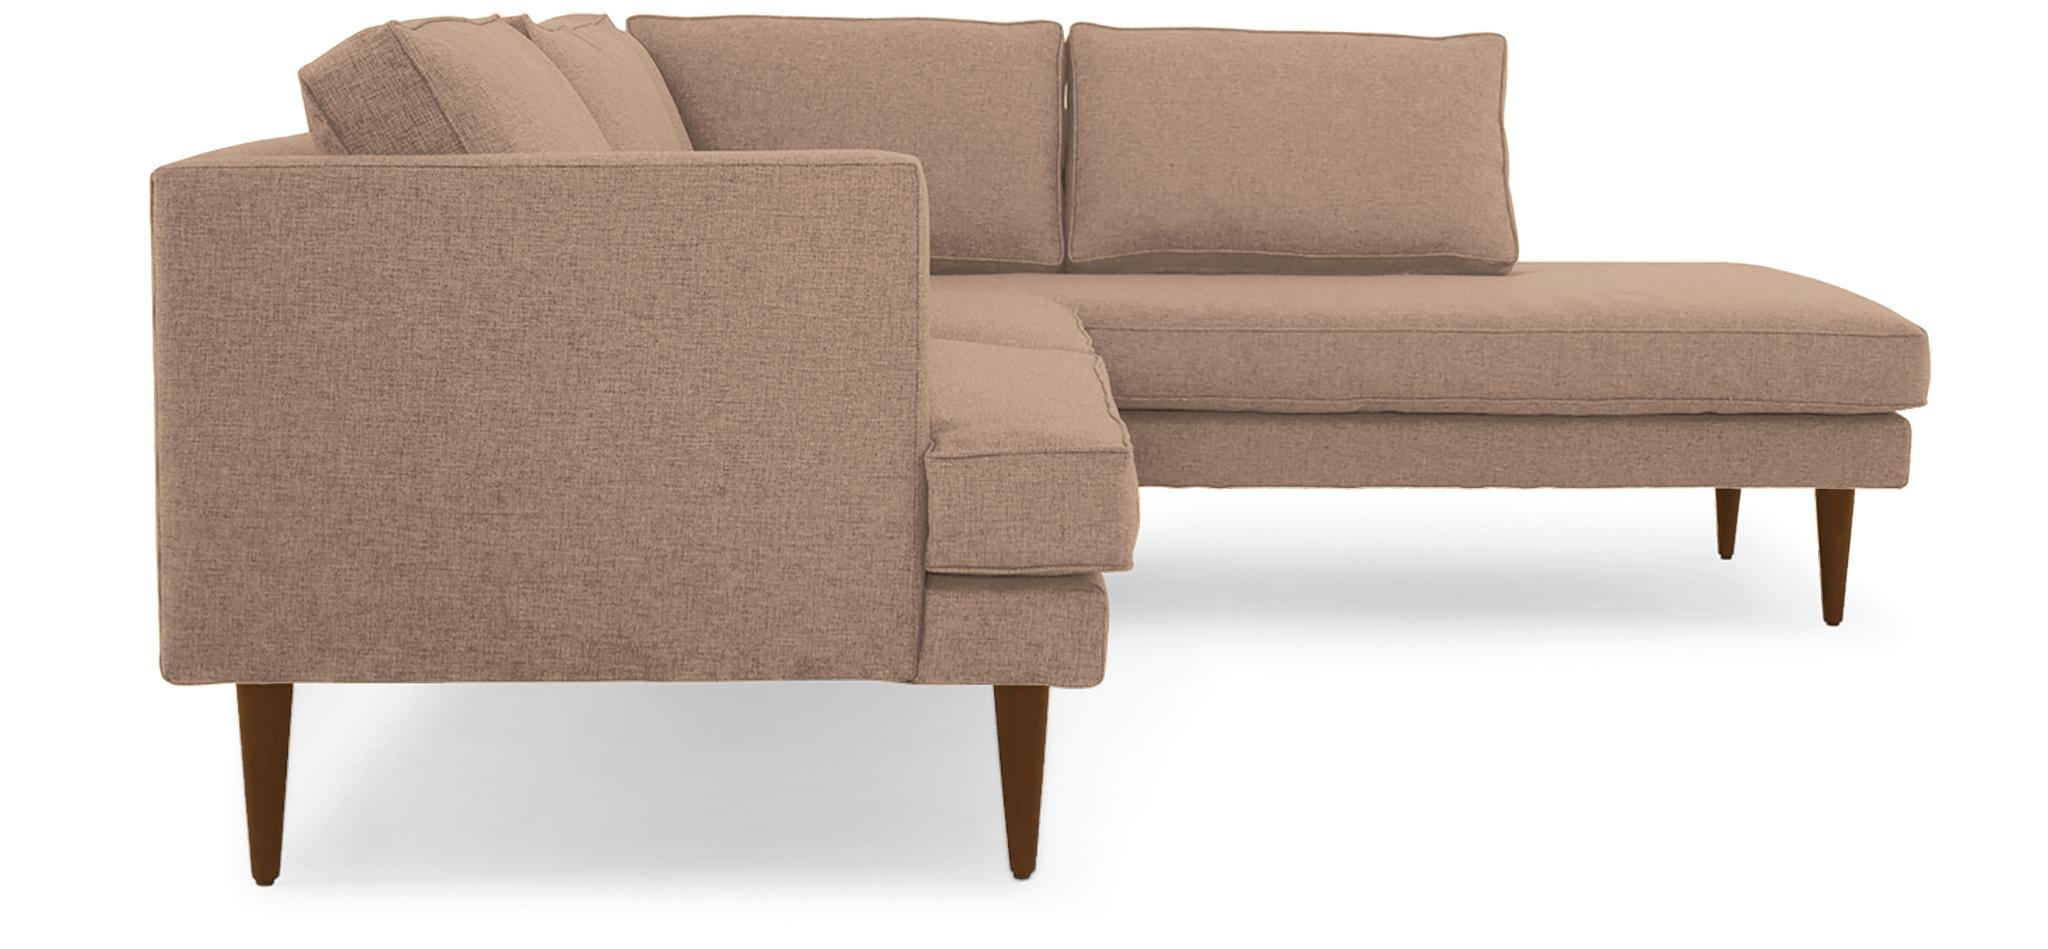 Pink Preston Mid Century Modern Sectional with Bumper (2 piece) - Royale Blush - Mocha - Left - Image 2